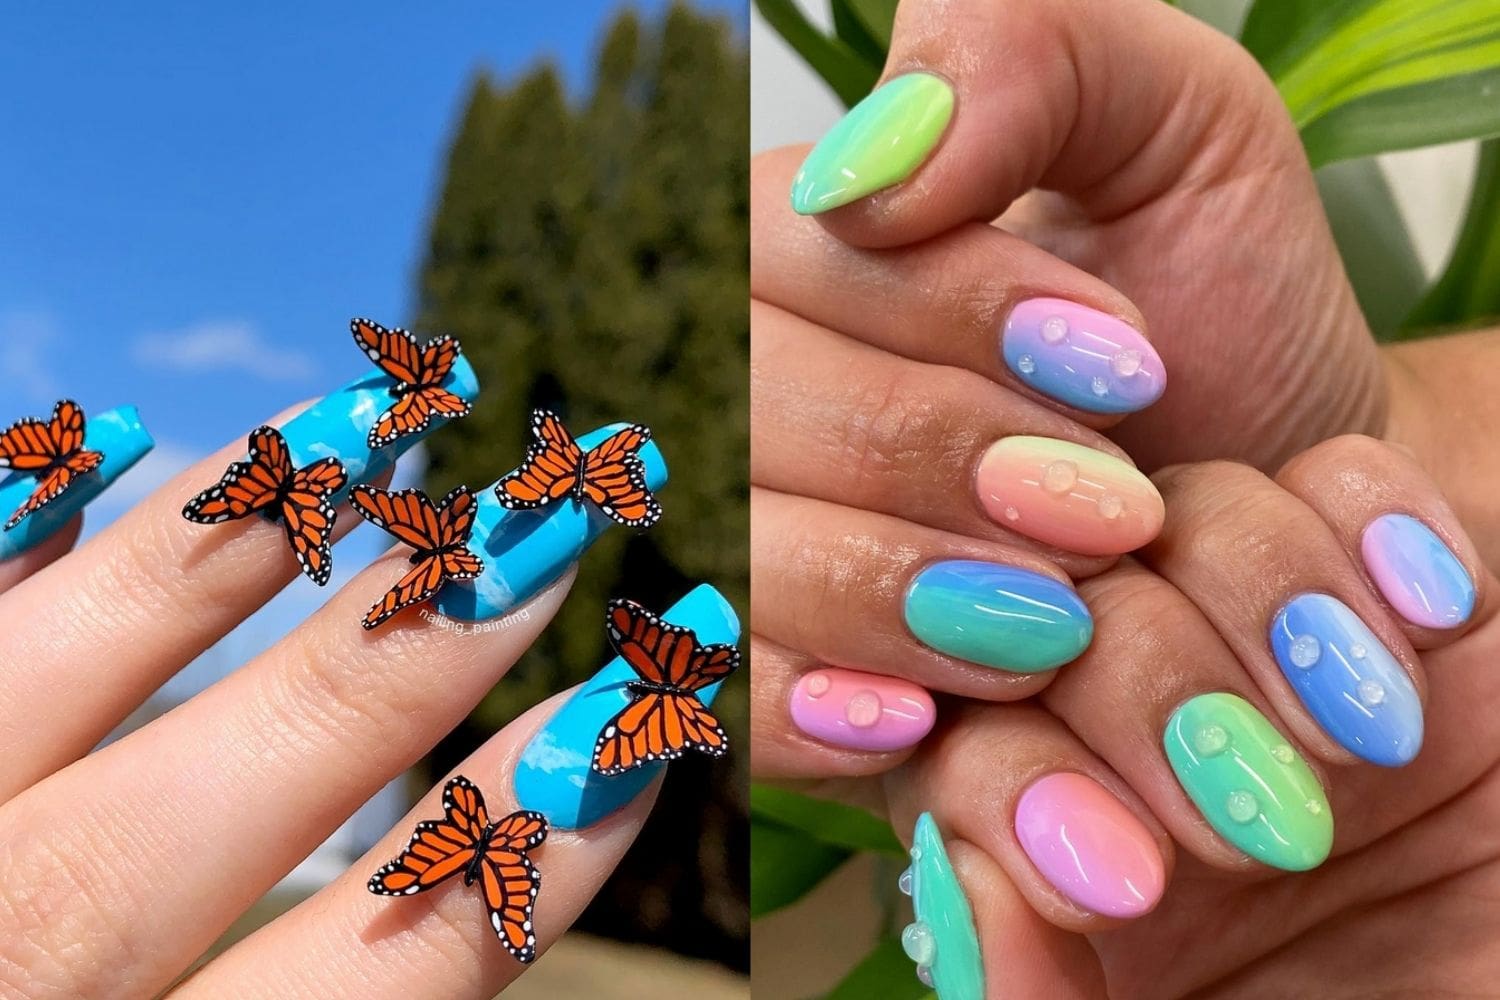 25 Designs for 3D Nails That Are Sure to Stand Out - Let's Eat Cake